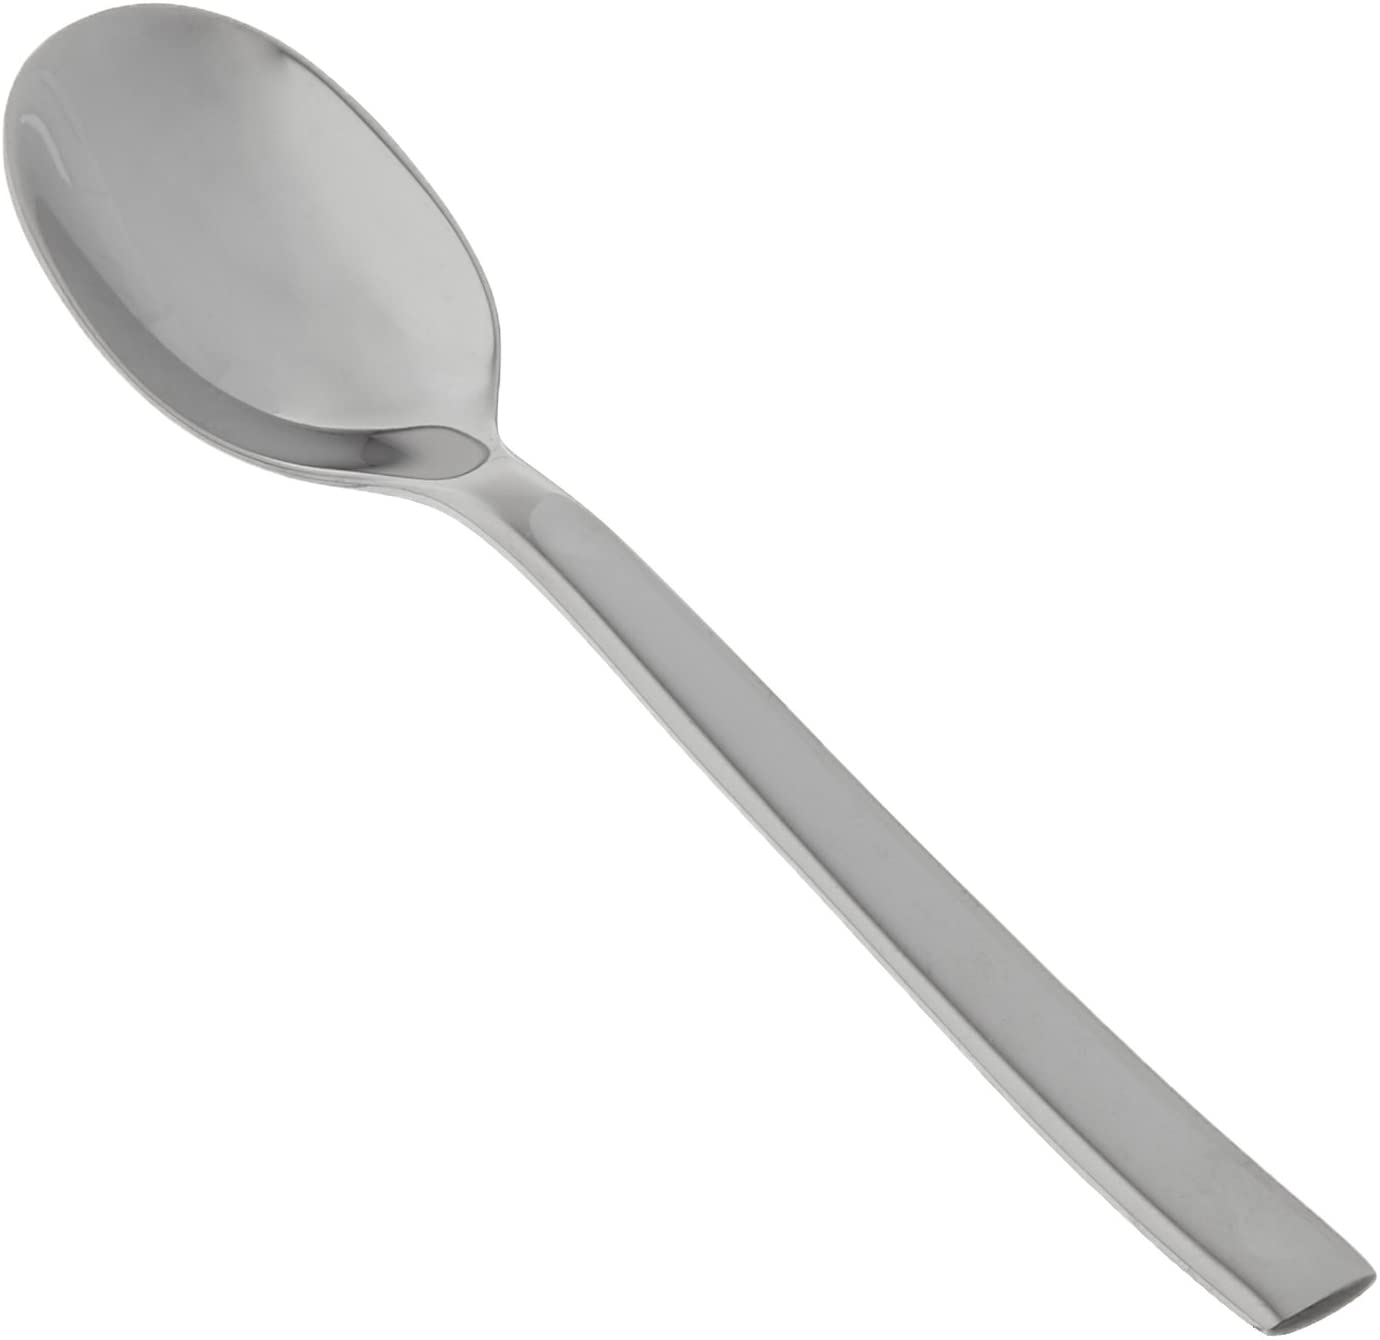 Alessi Coffee Spoons 18/10 Stainless Steel Oval REB09/8, Steel